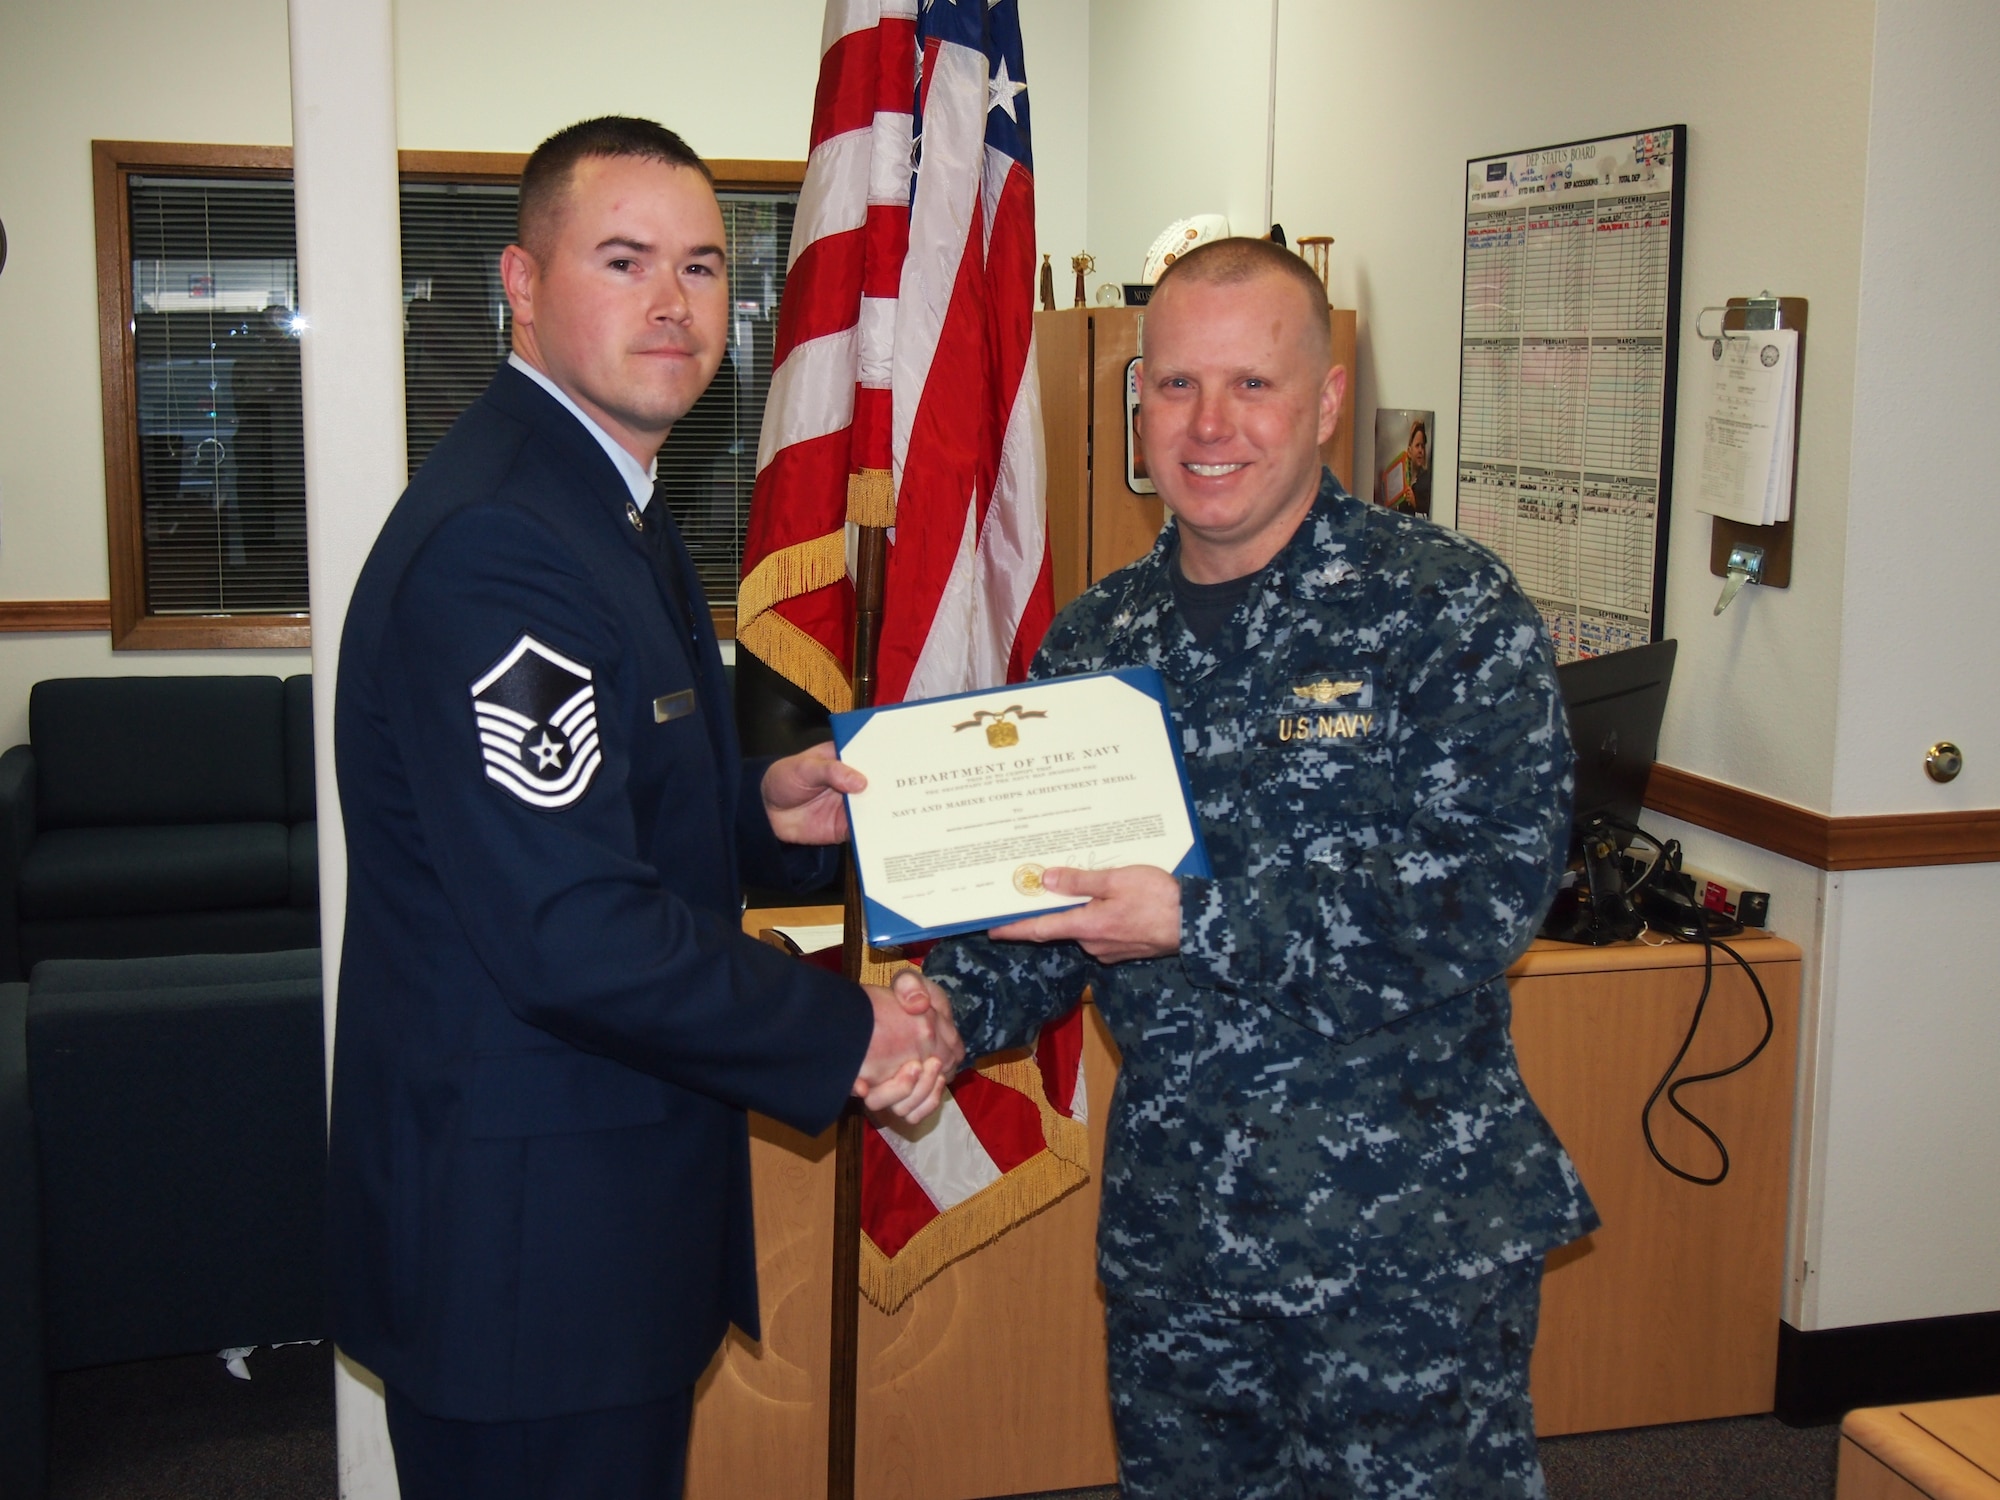 In a case of joint recruiting at its finest, Master Sgt. Christopher Dowlearn was presented with a Navy Achievement Medal April 17 by Cmdr. Ronnie Candiloro, commanding officer of the Navy Recruiting District in Portland, Ore. Dowlearn, of the 361st Recruiting Squadron, sent four disqualified Air Force applicants to the Navy recruiting office; all four qualified and entered the Navy’s Delayed Enlistment Program. (U.S. Air Force photo)